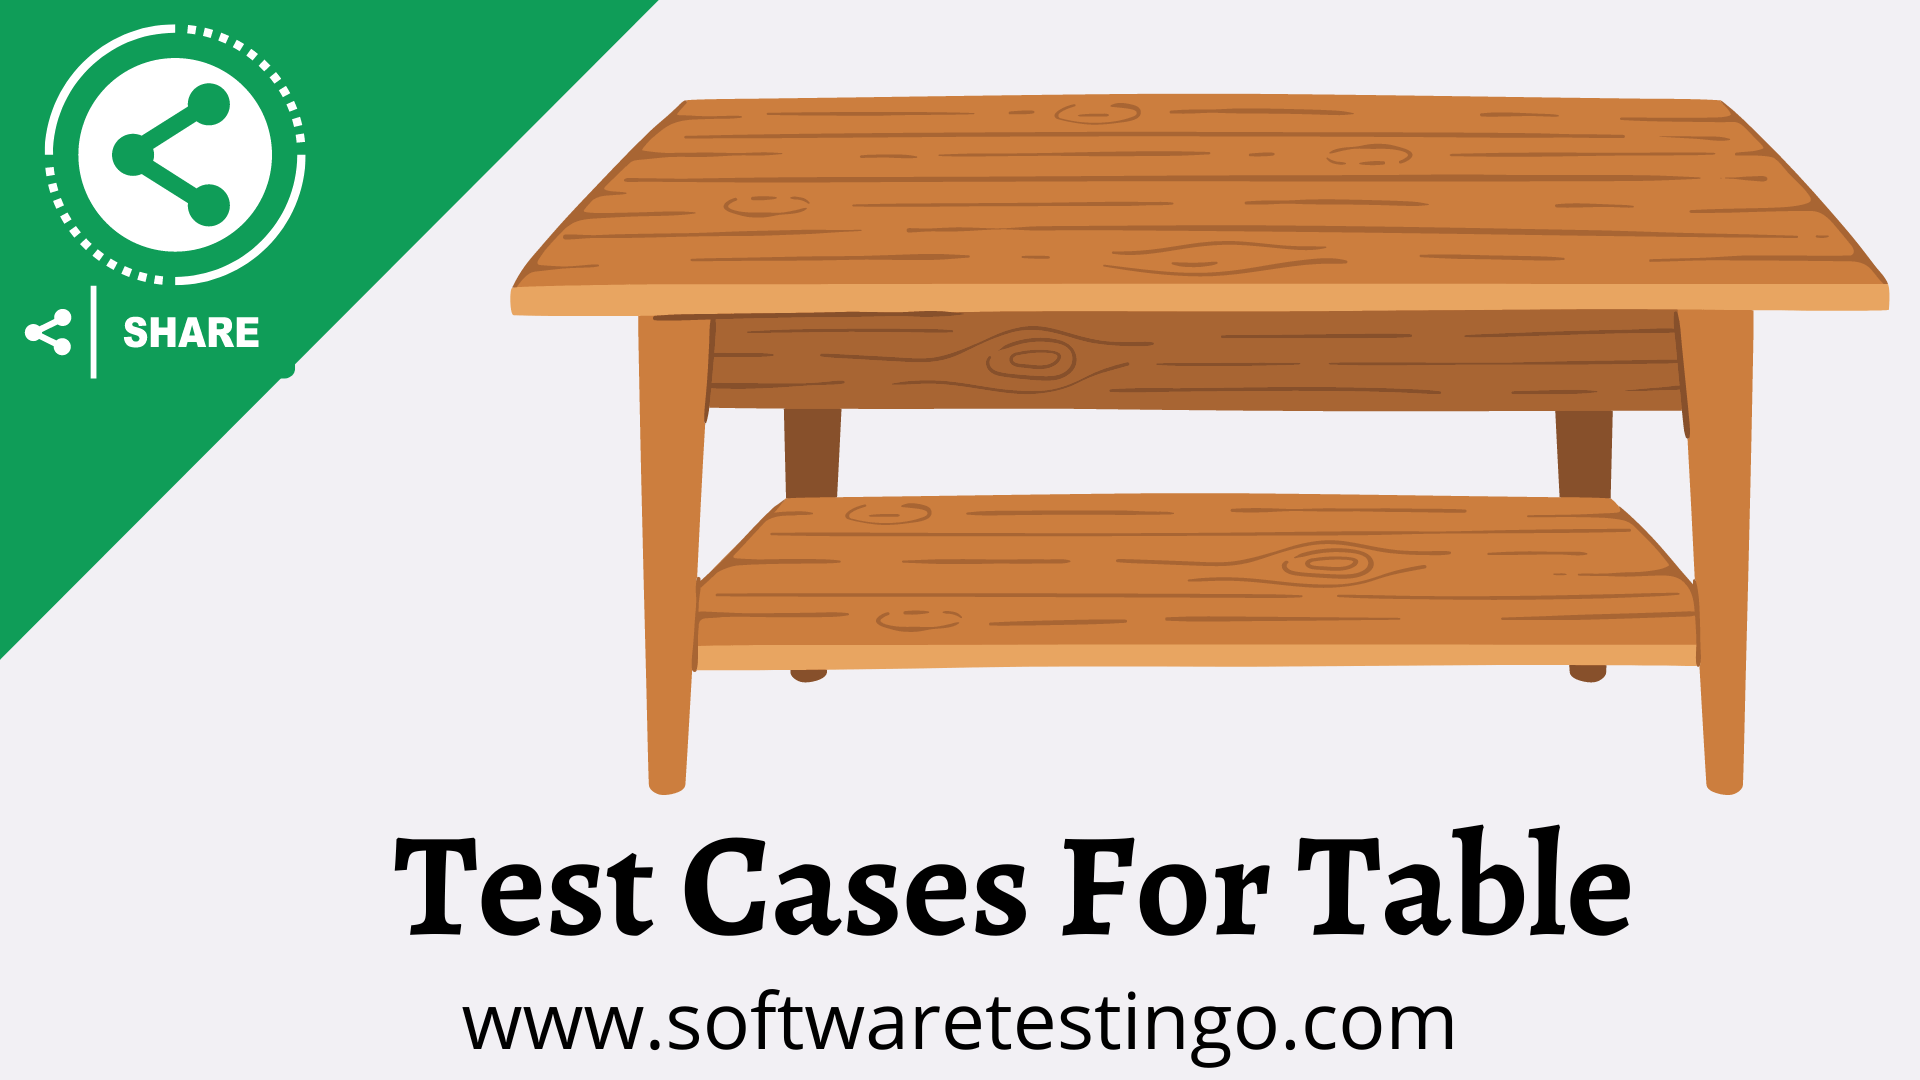 Test Cases For Table